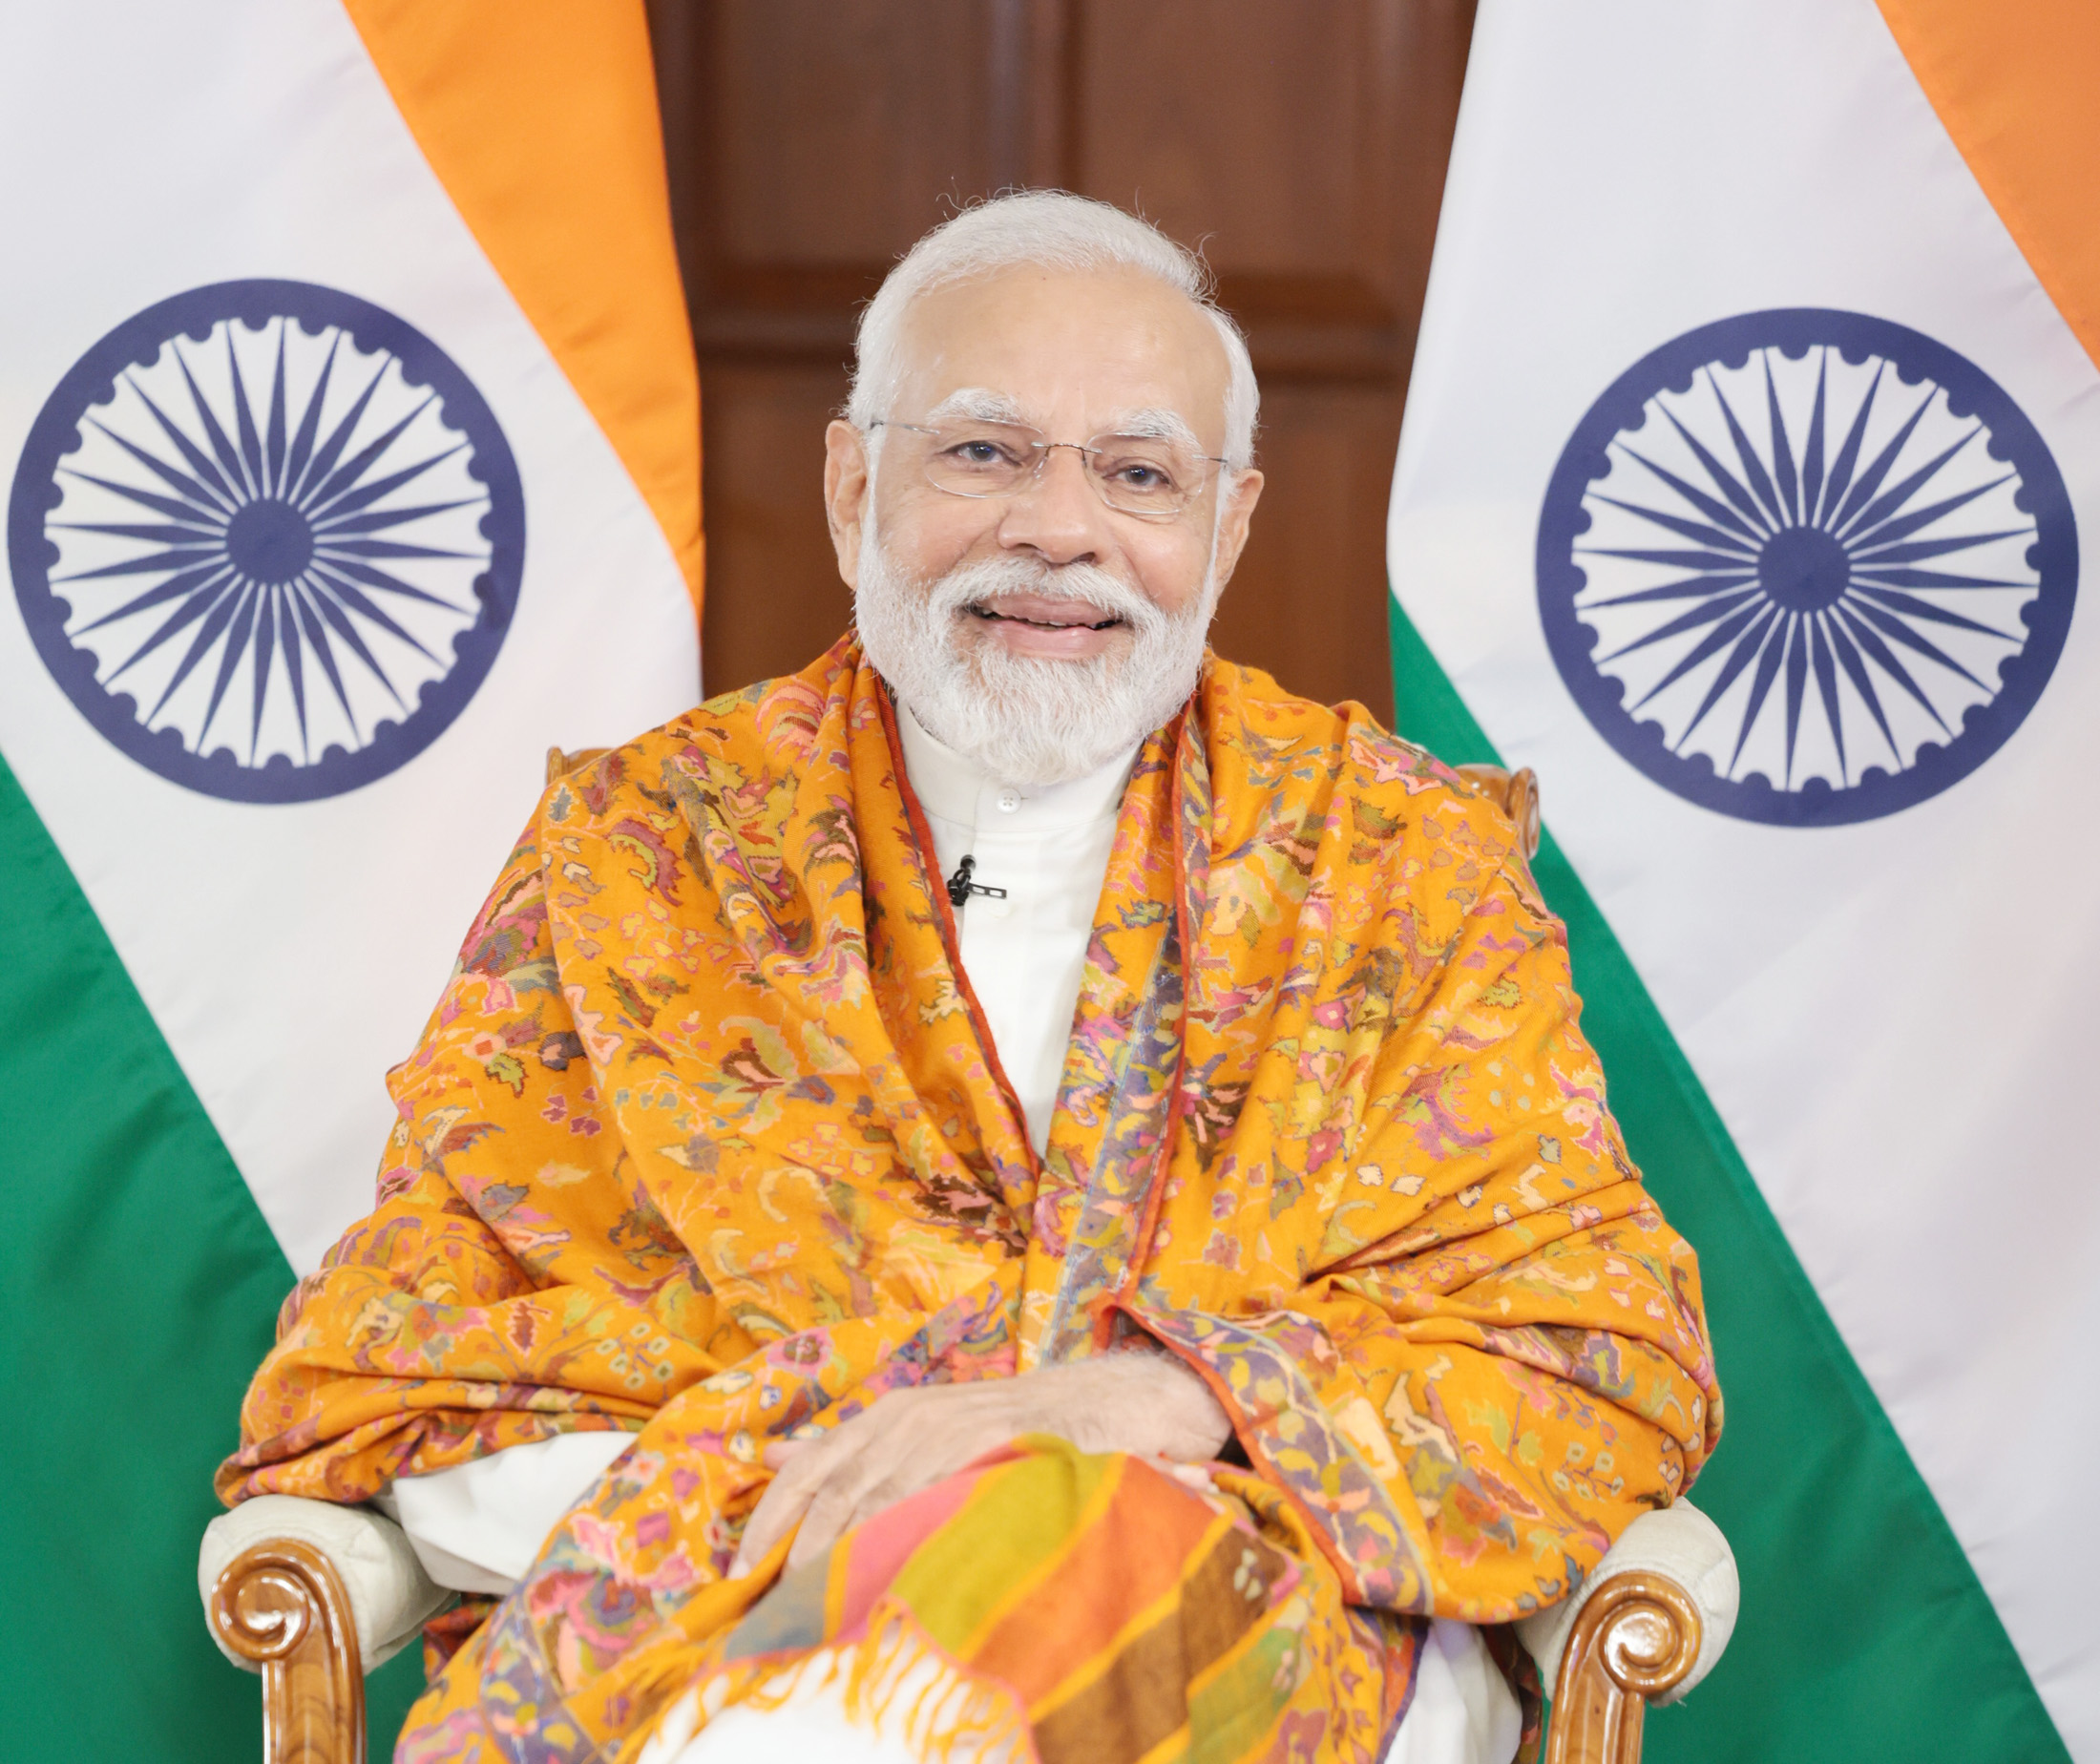 There are poor people among Brahmins and Baniyas too should they not get reservation PM Modi spoke in Shimla